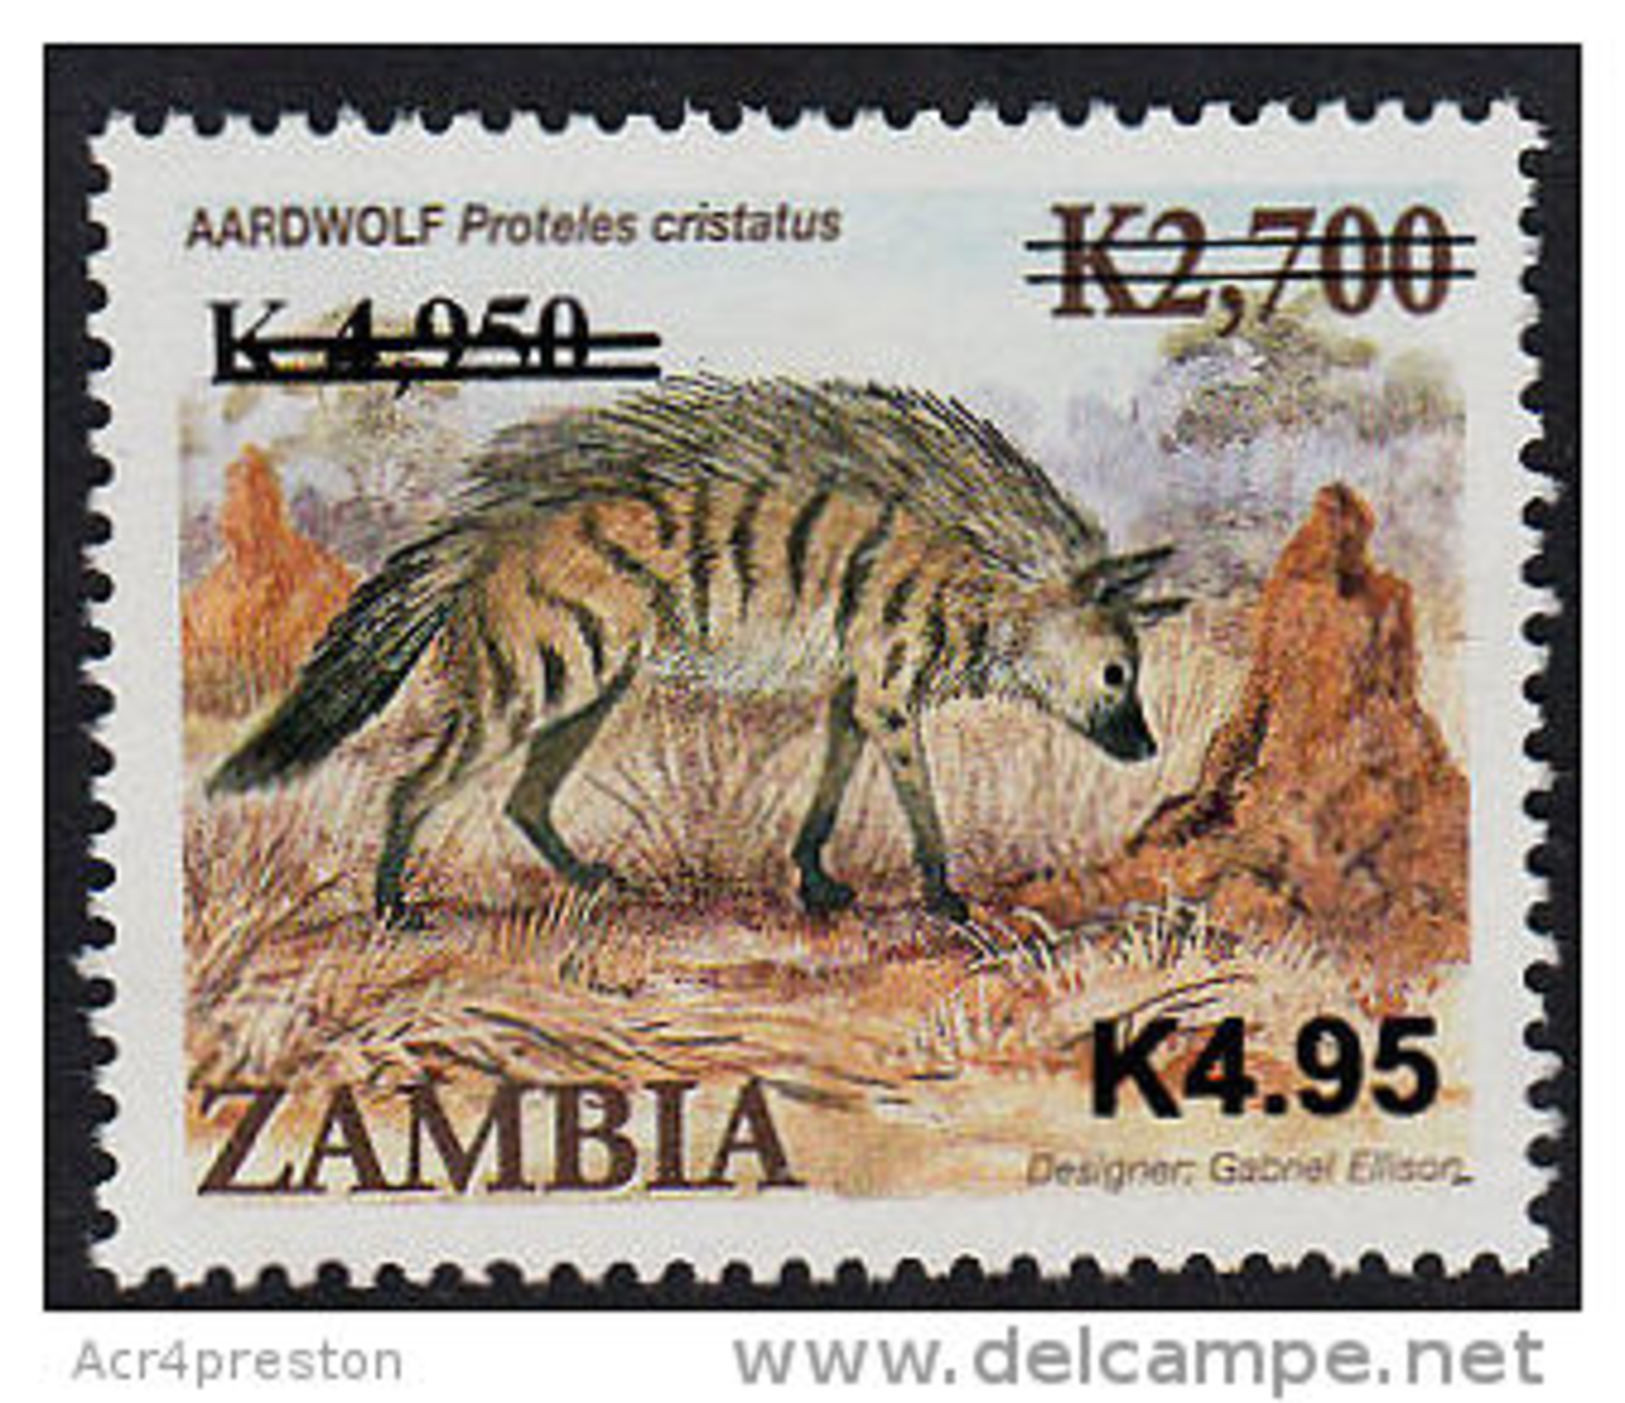 Zm1101 ZAMBIA 2013, New Currency K4.95 Surcharge On K4,900 On K2,700 Animals  MNH - Zambia (1965-...)